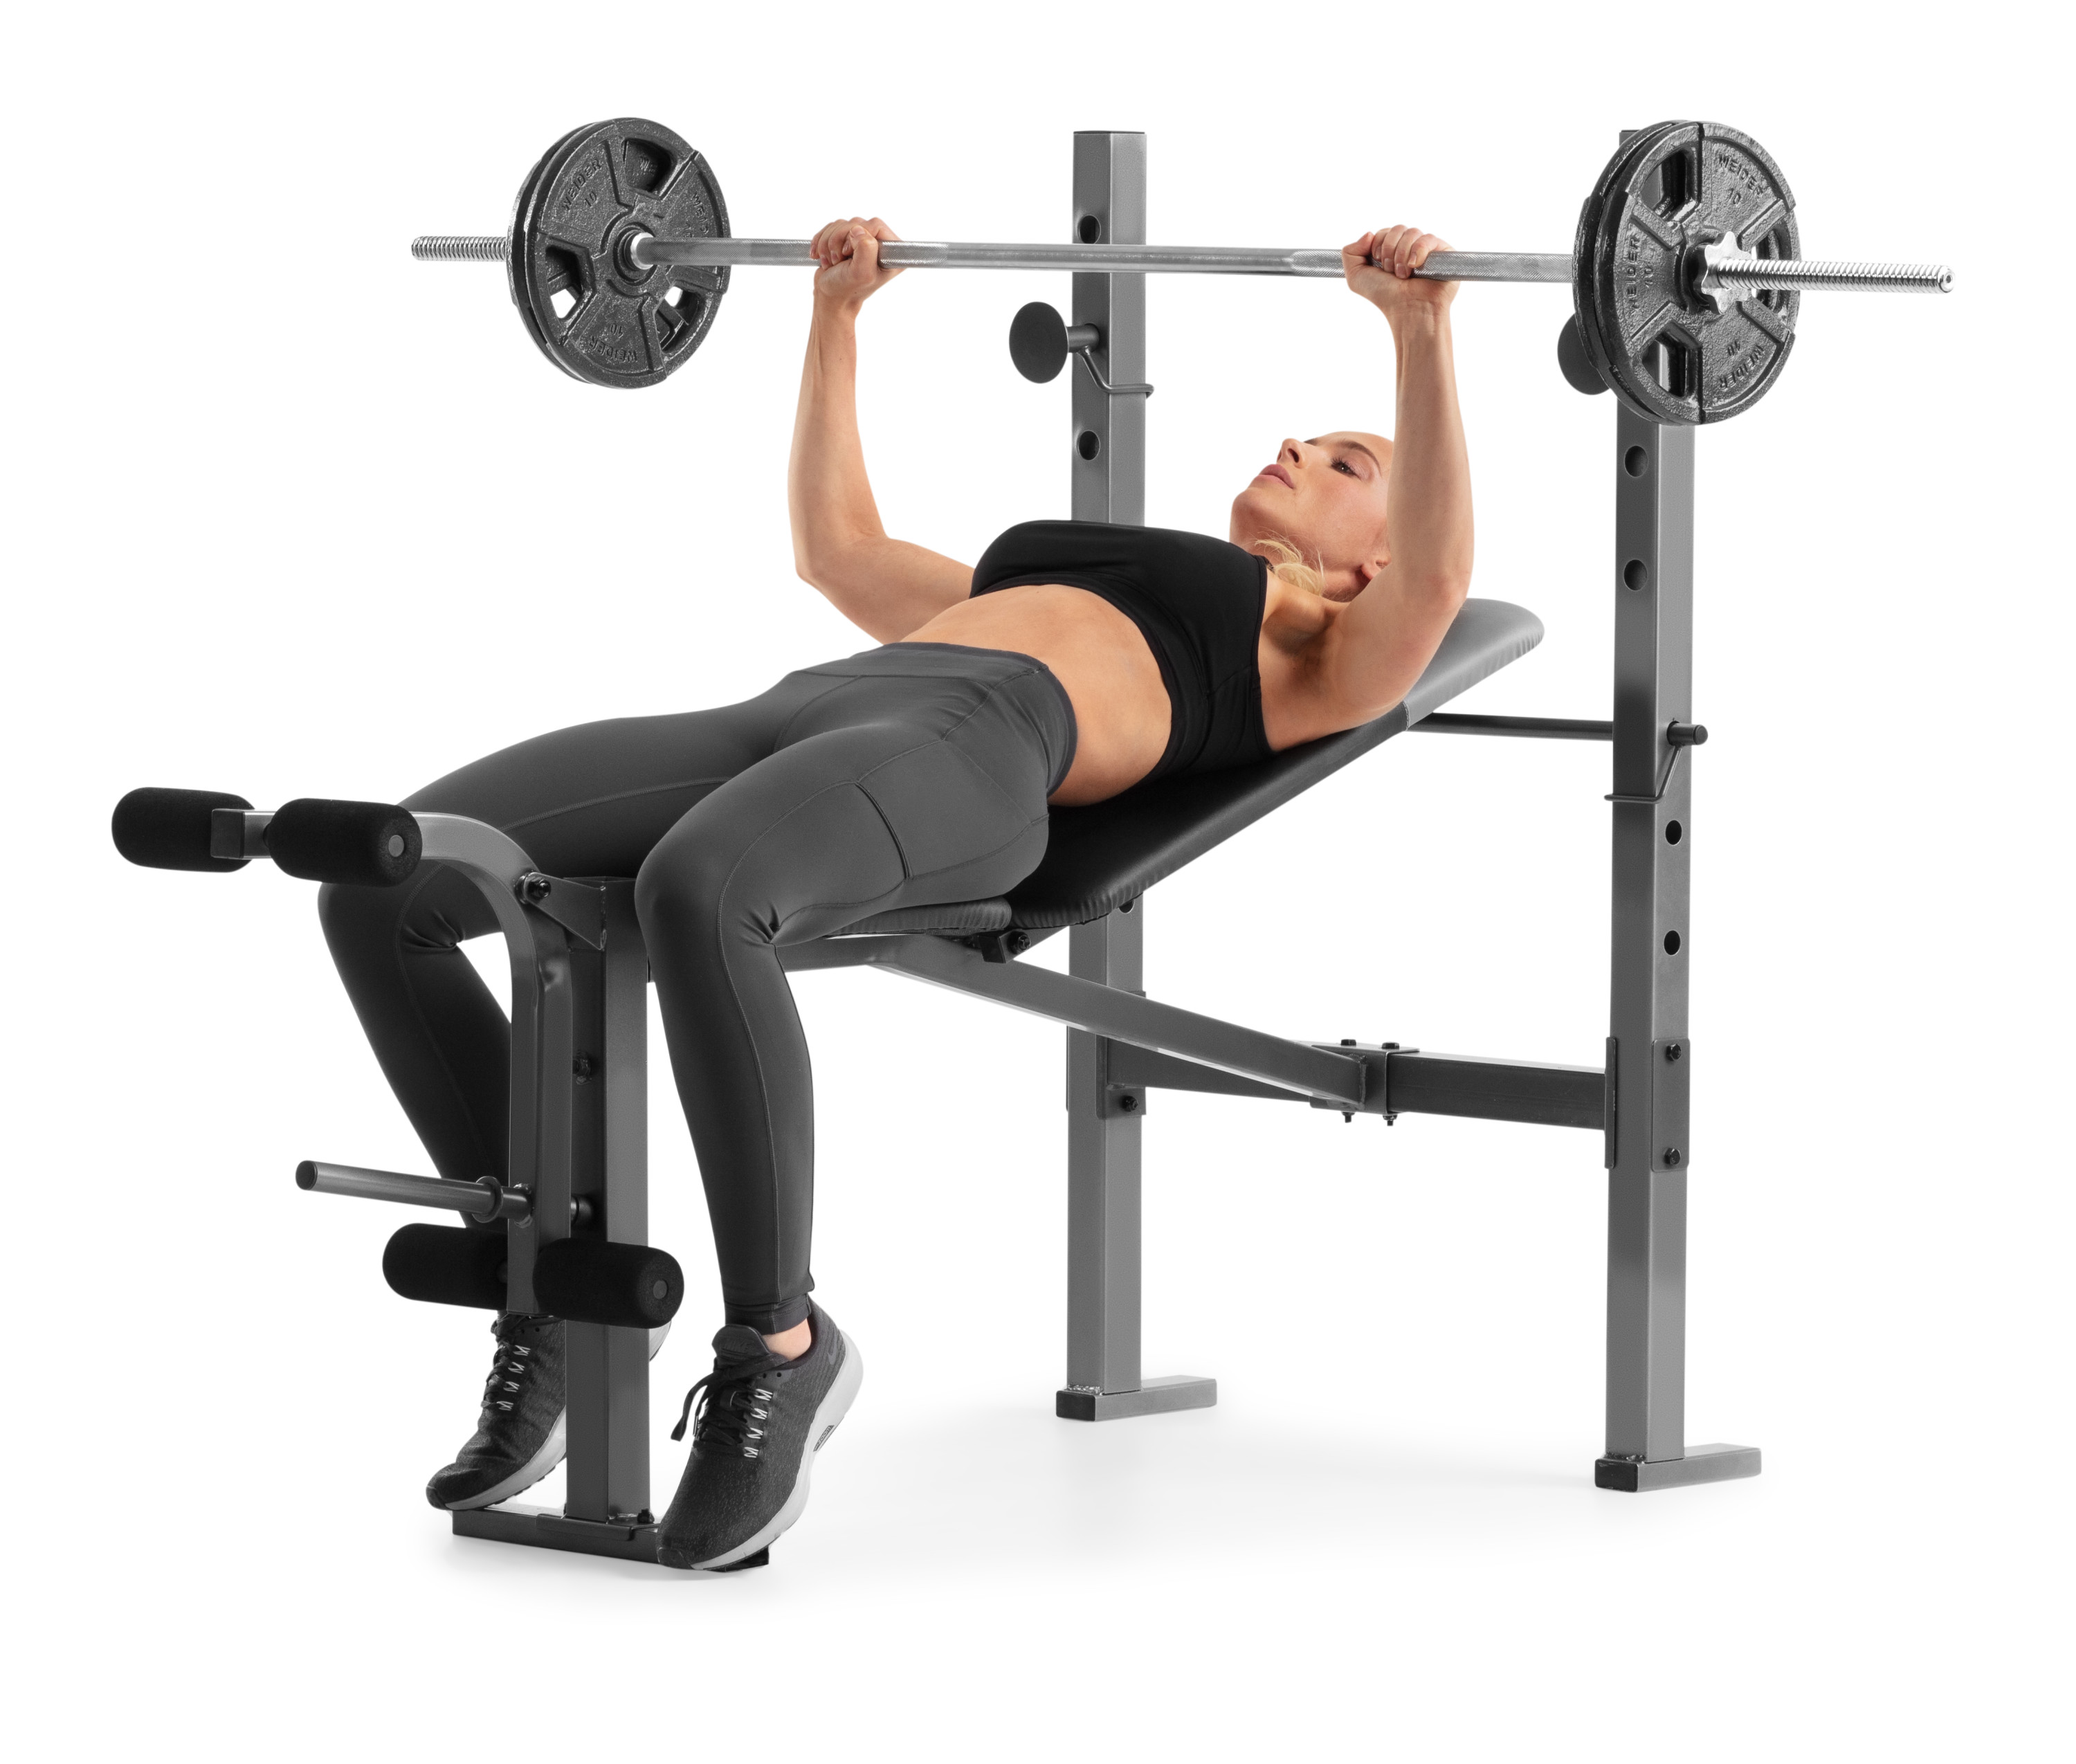 Weider XR 6.1 Adjustable Weight Bench with Leg Developer, 410 lb. Weight Limit - image 11 of 12